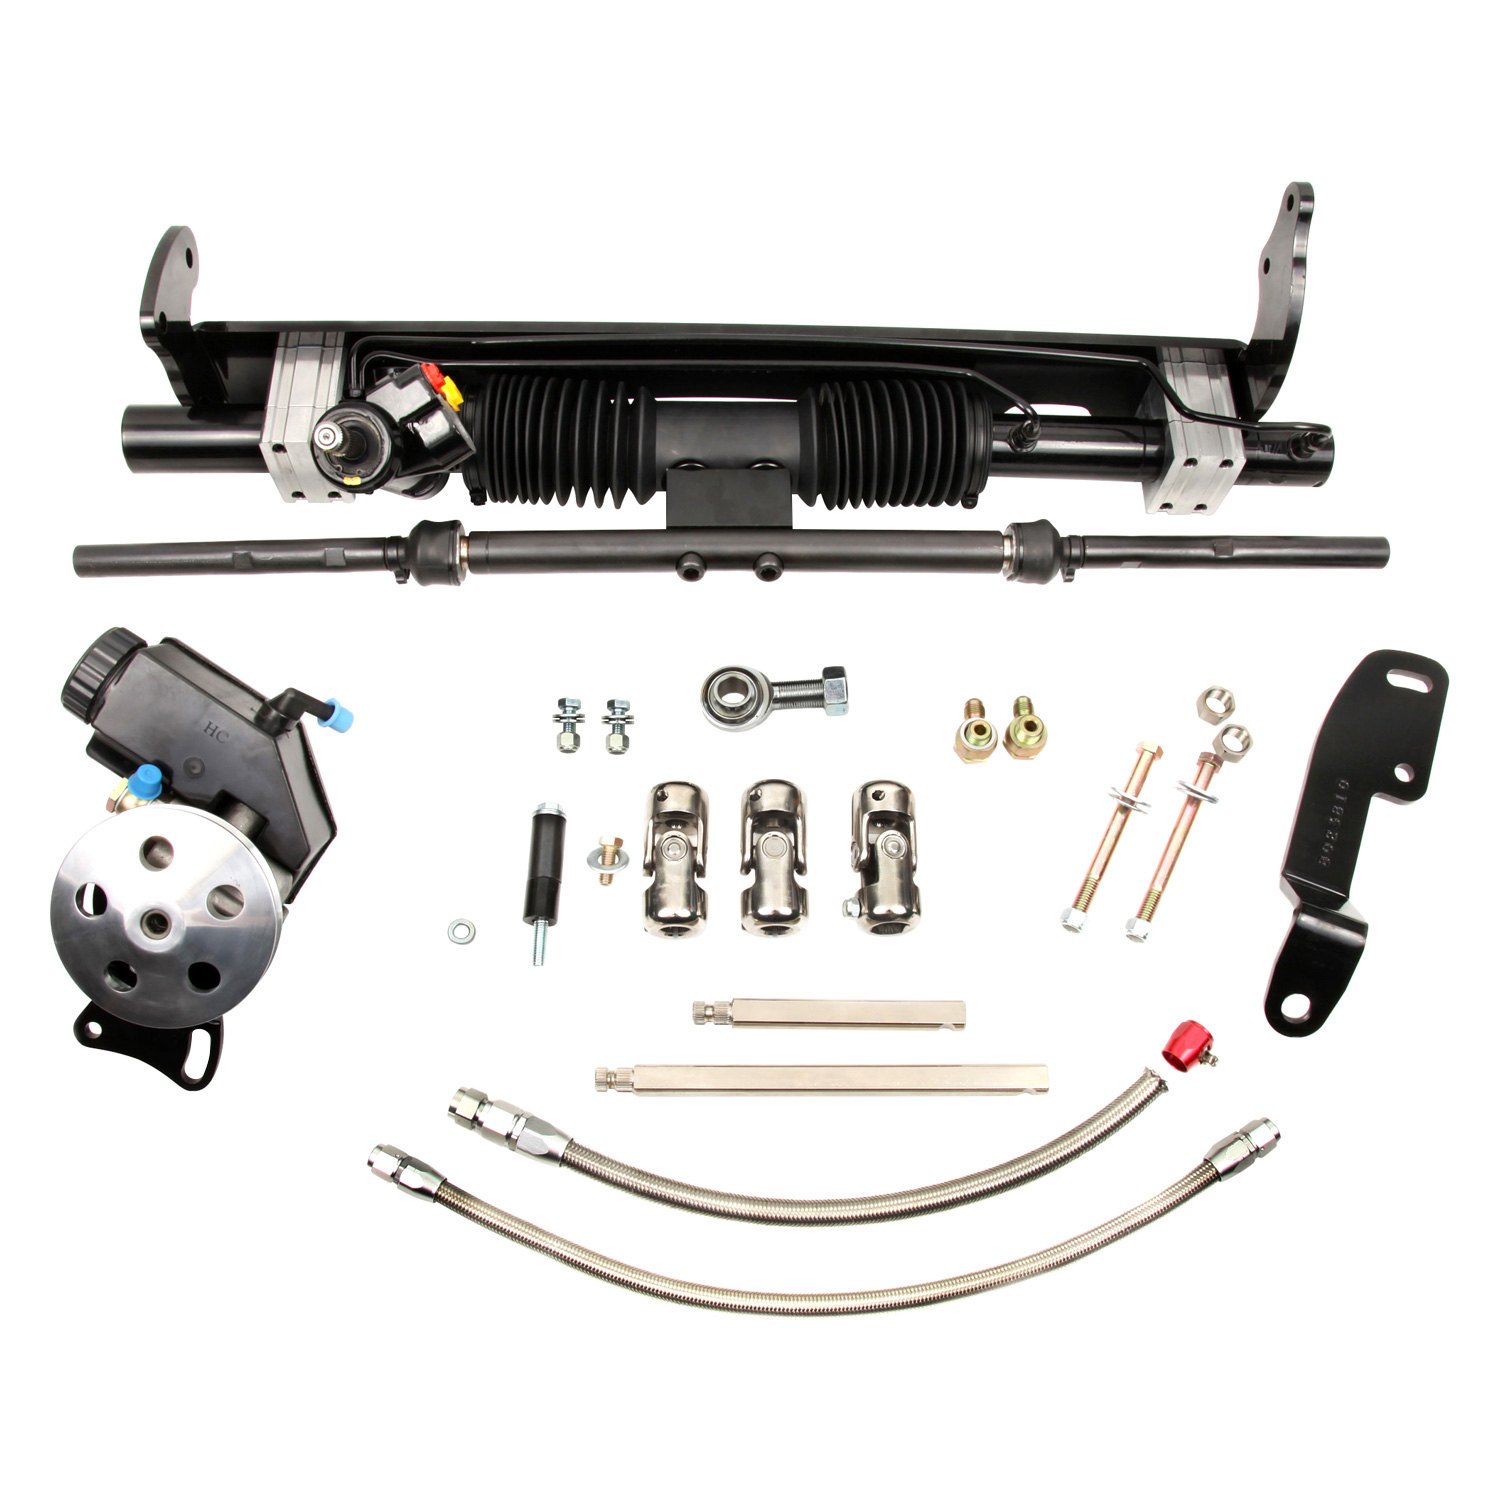 Unisteer ® 8011000-01 - Hydraulic Power Steering Rack and Pinion Kit.